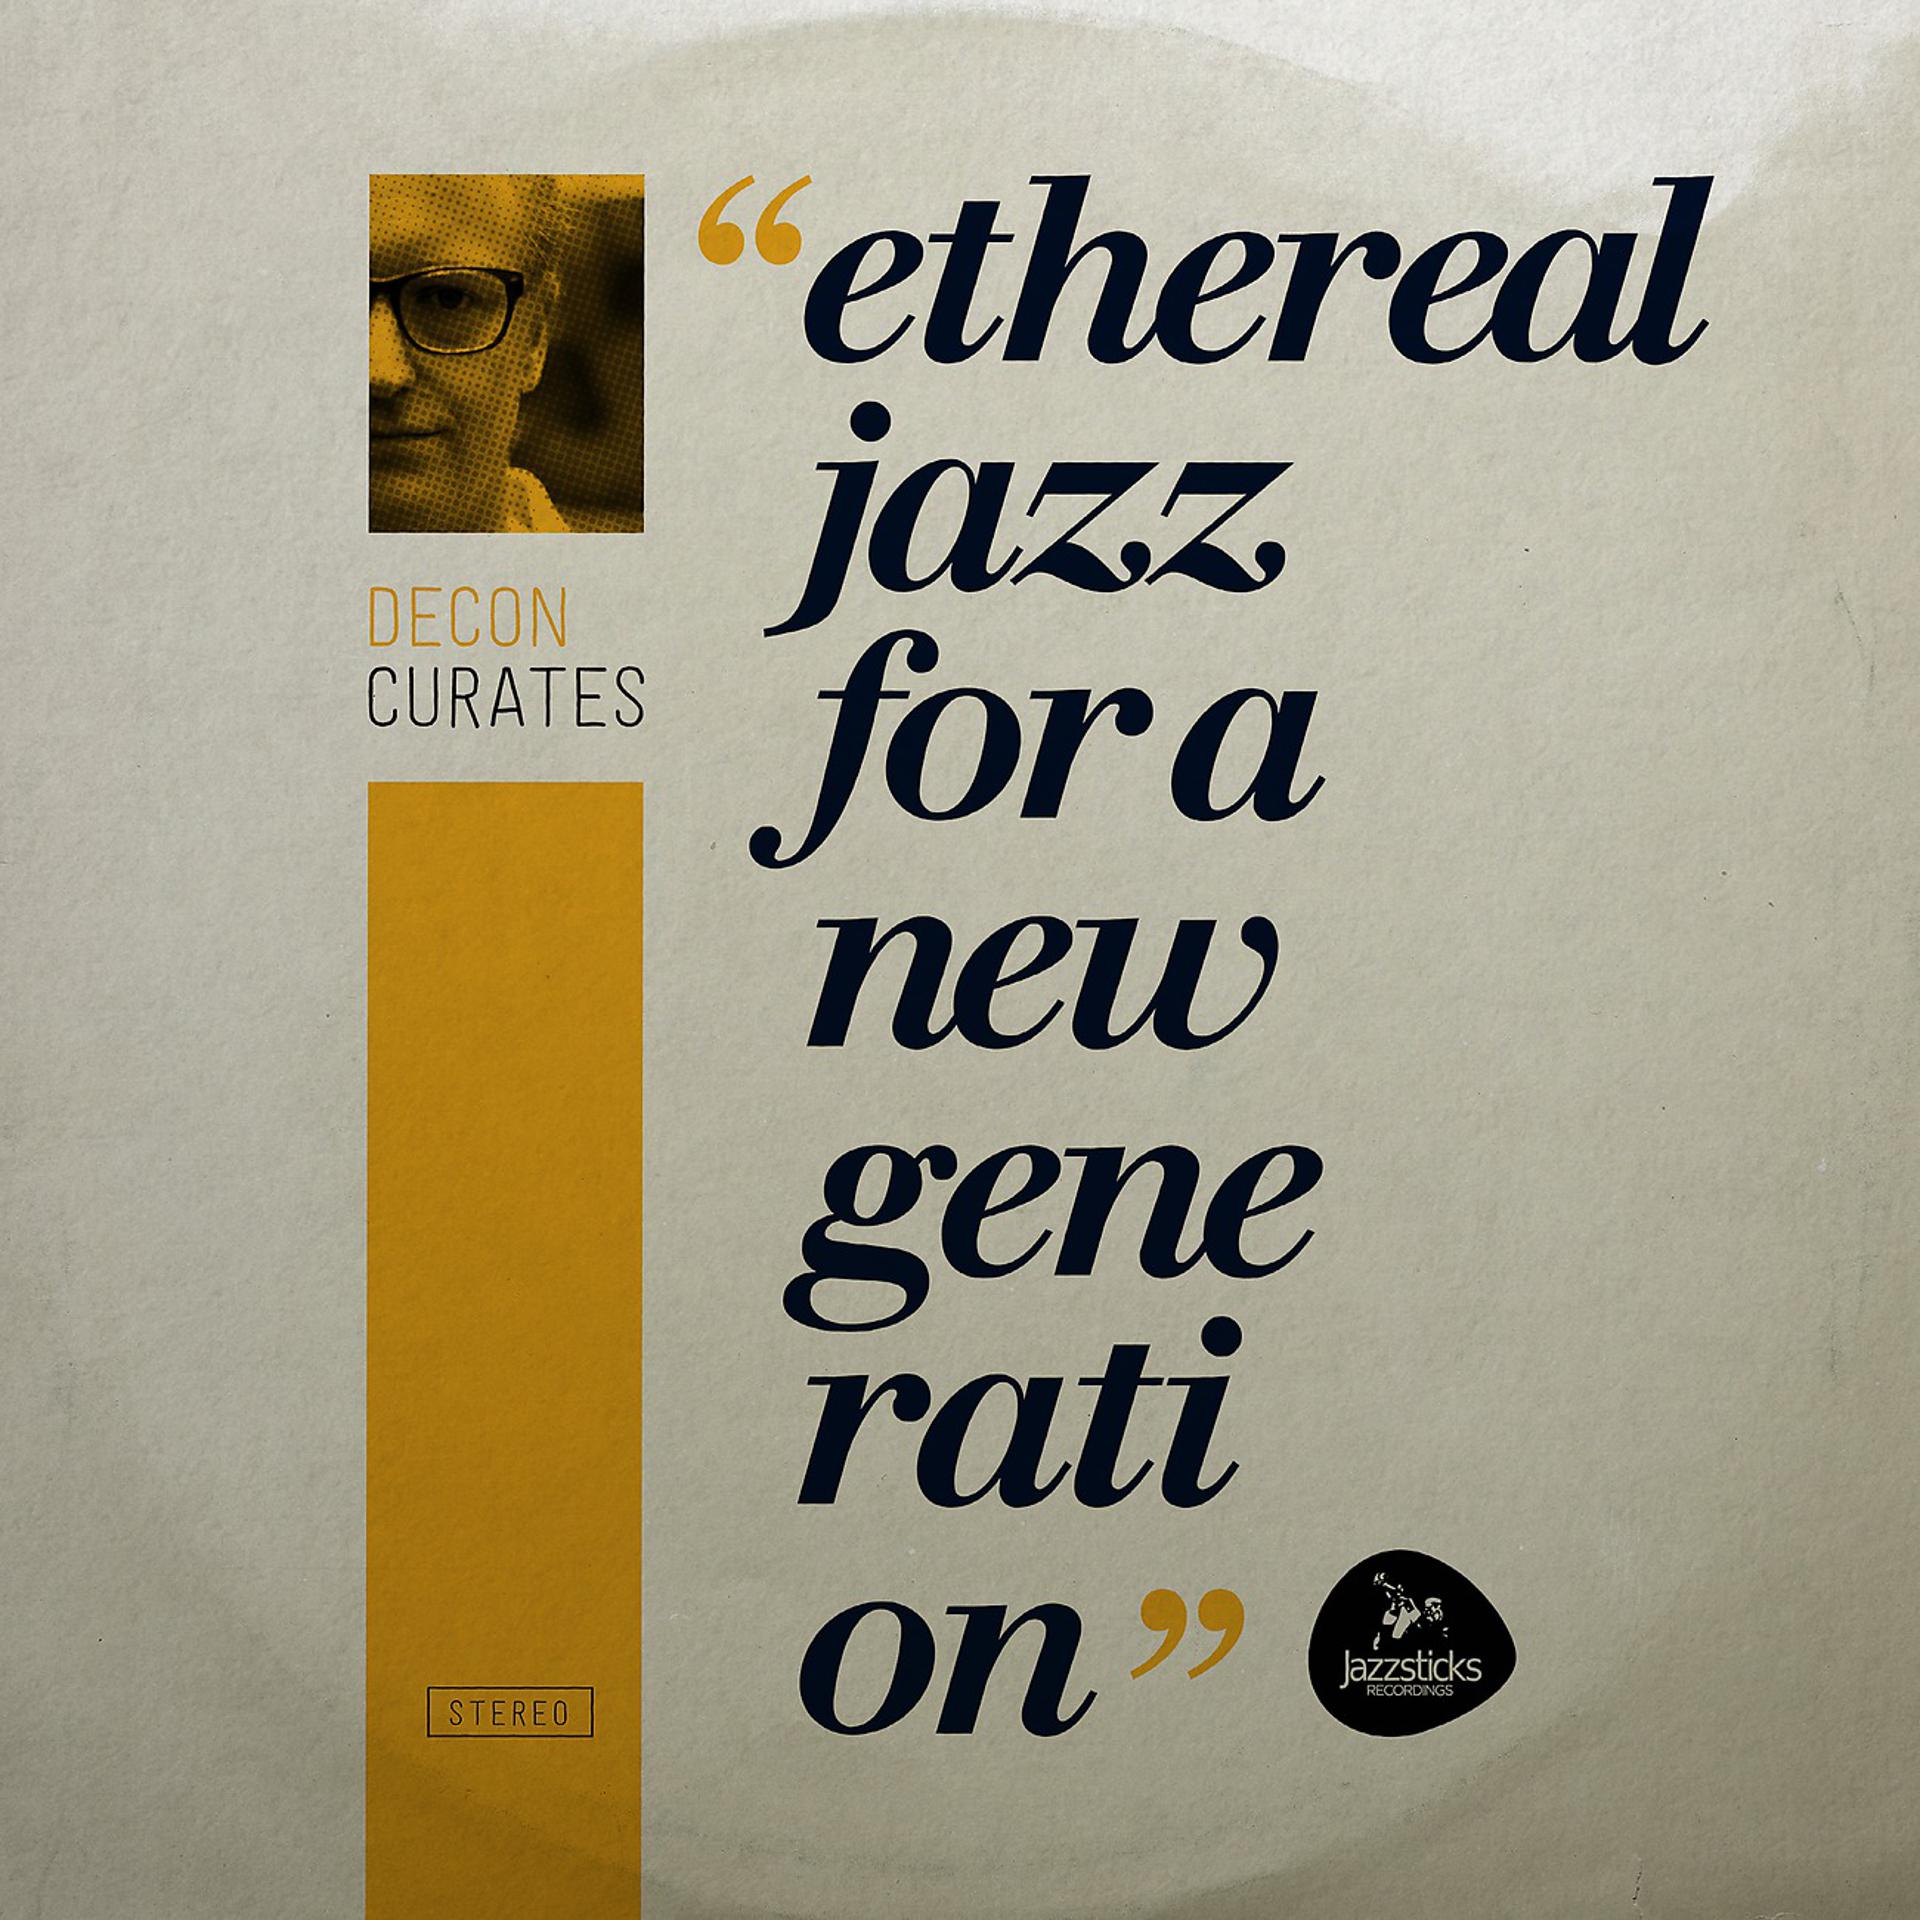 Постер альбома Decon curates: Ethereal Jazz for a New Generation